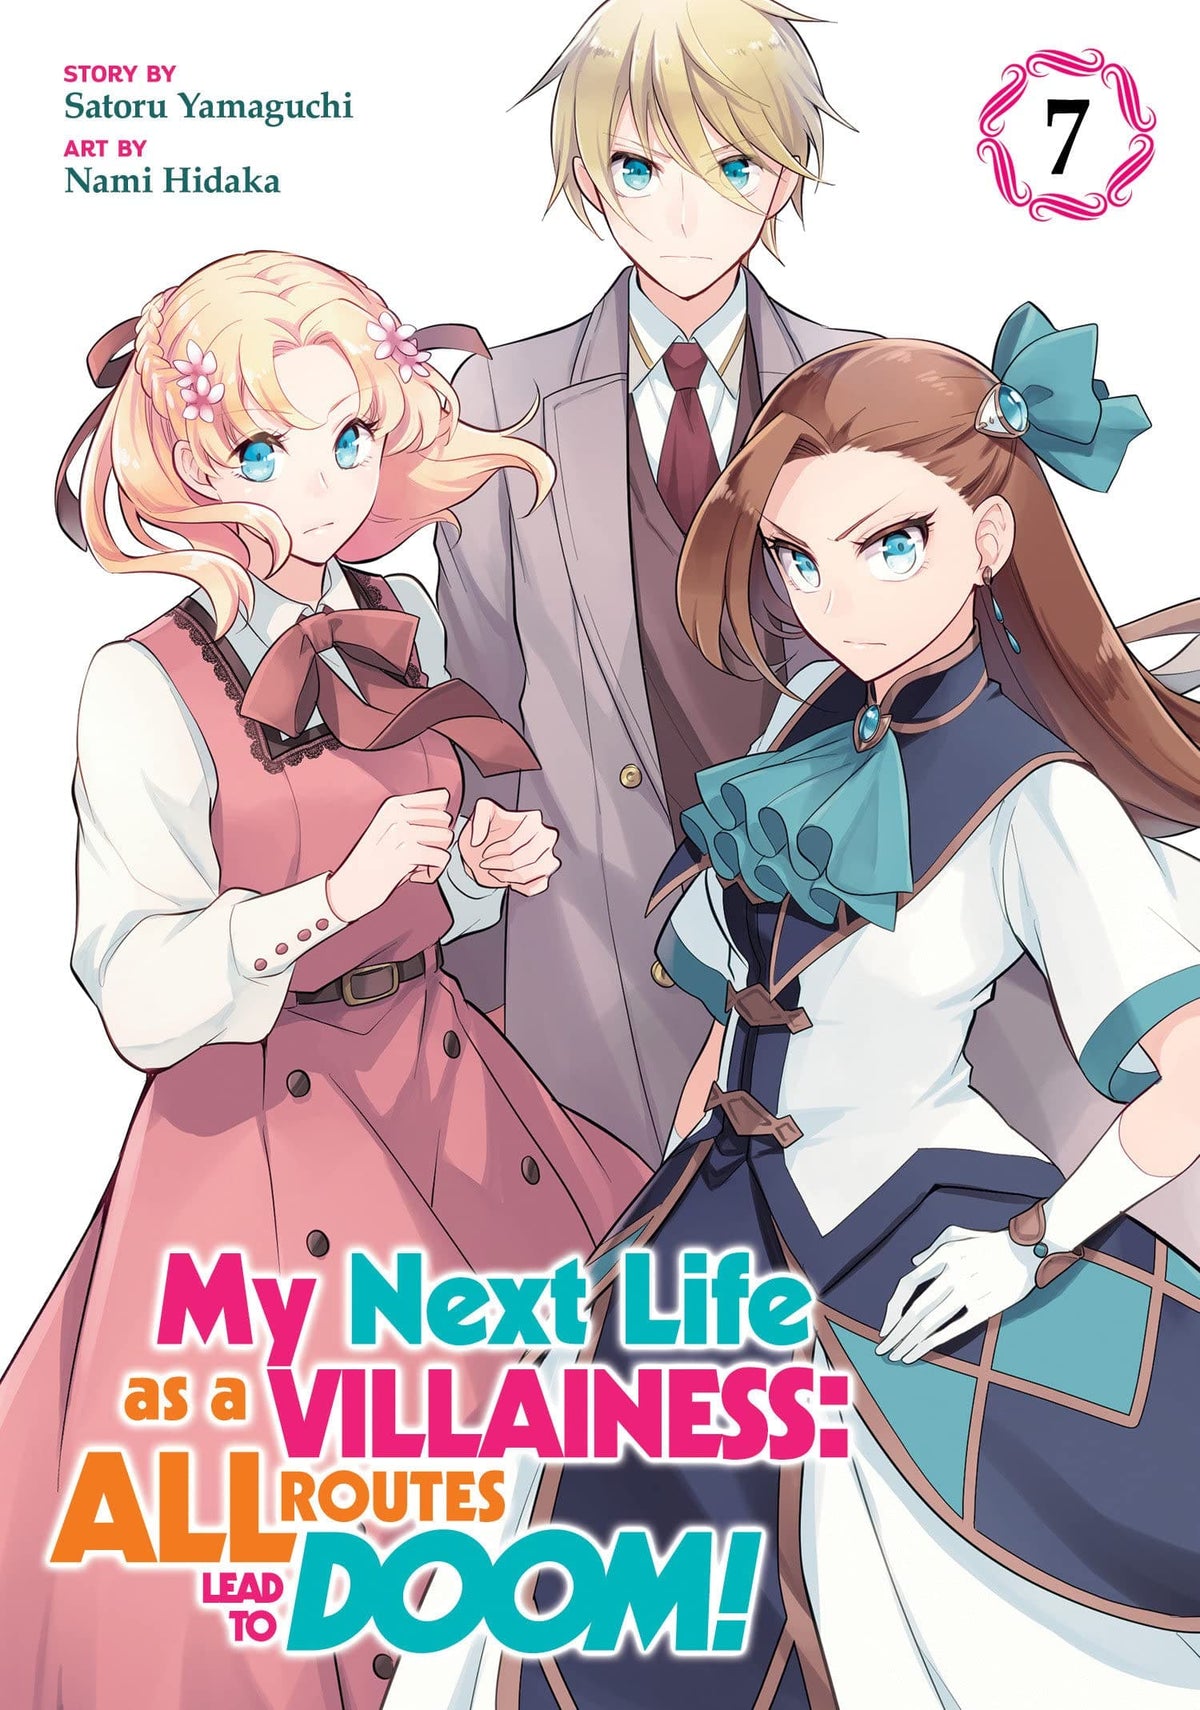 My Next Life as a Villainess: All Routes Lead to Doom! Vol. 7 - Third Eye